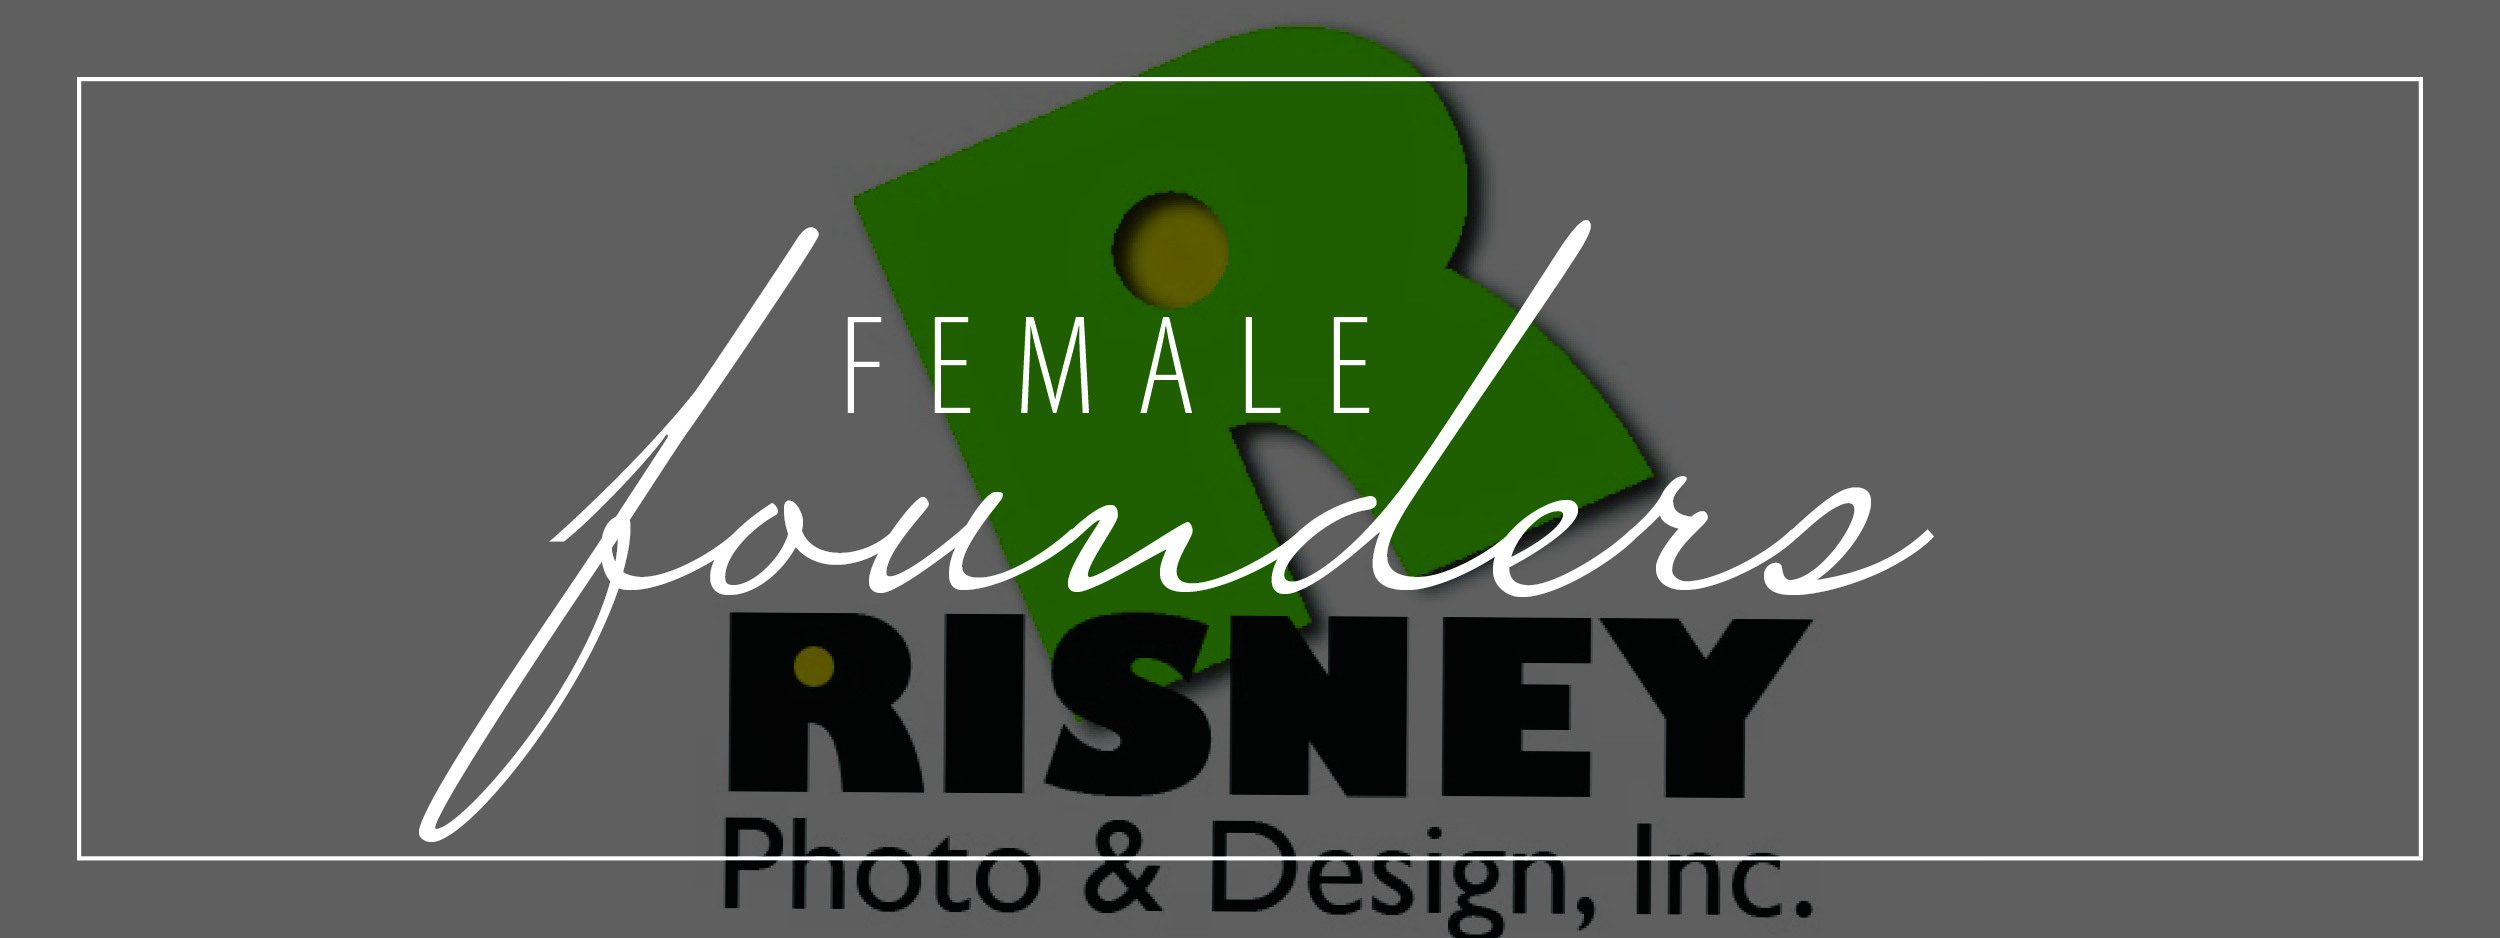 female founders written over Risney photo and design lo